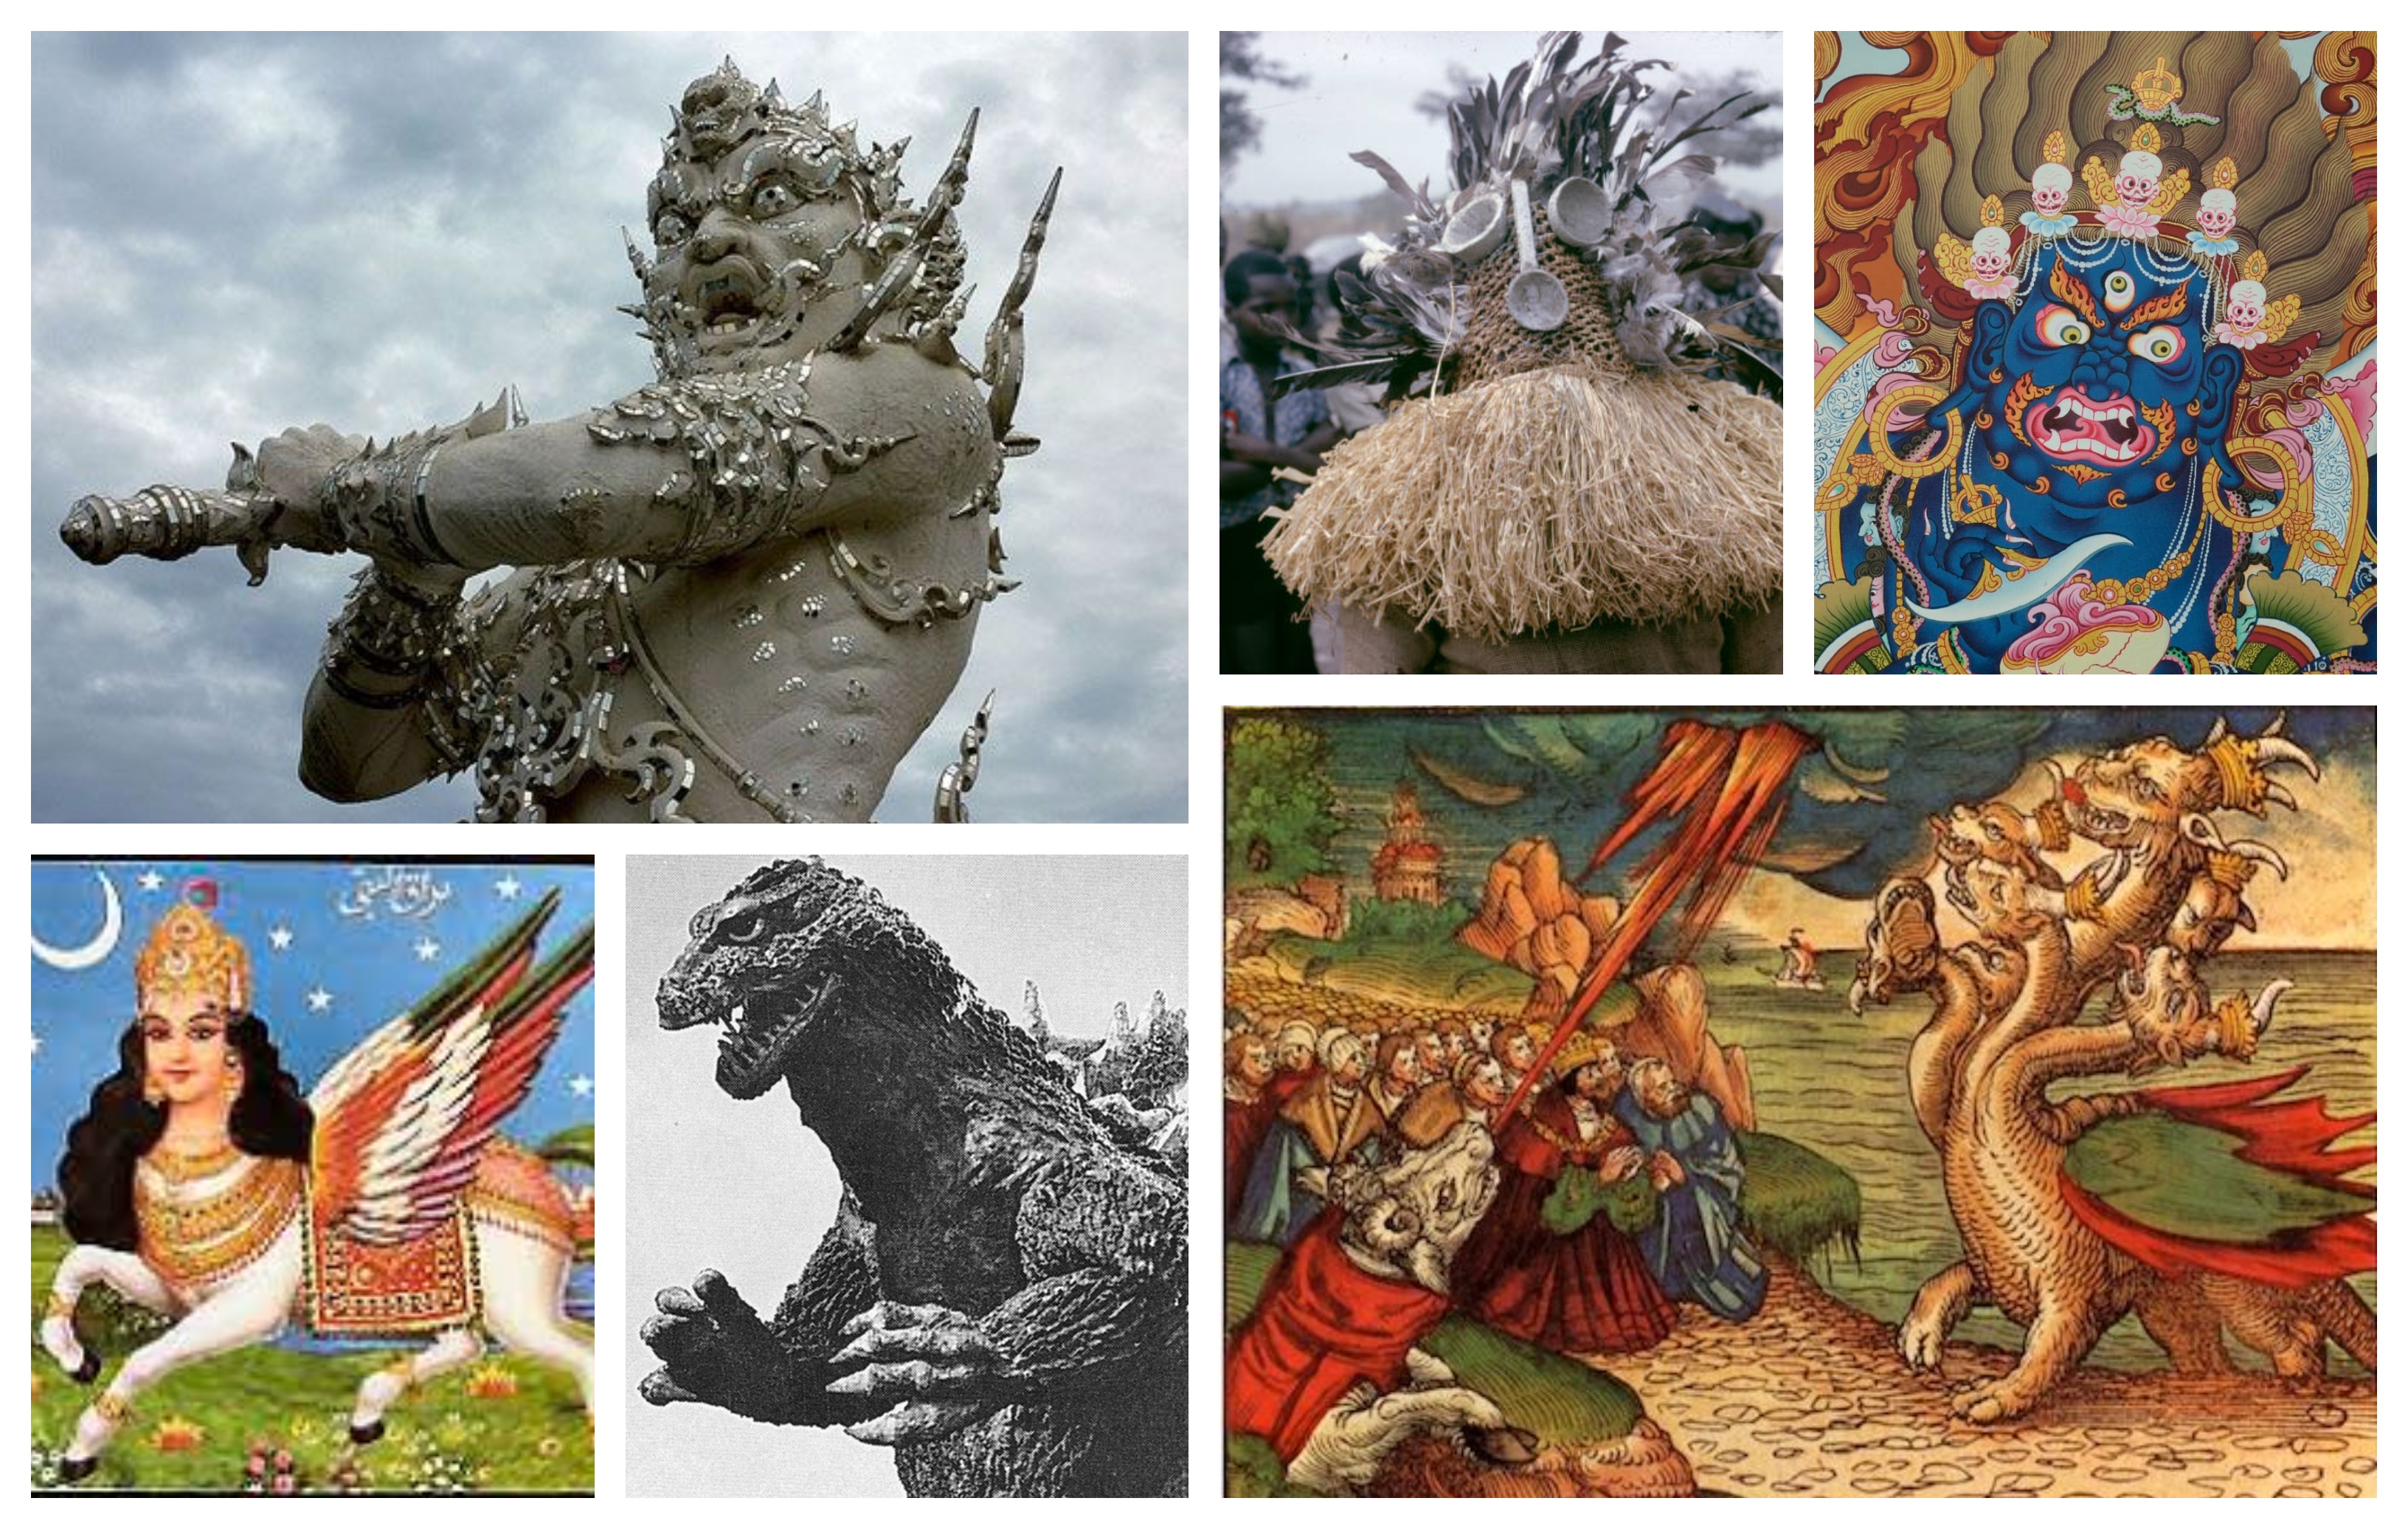 A collage of monstrous figures from various religious traditions